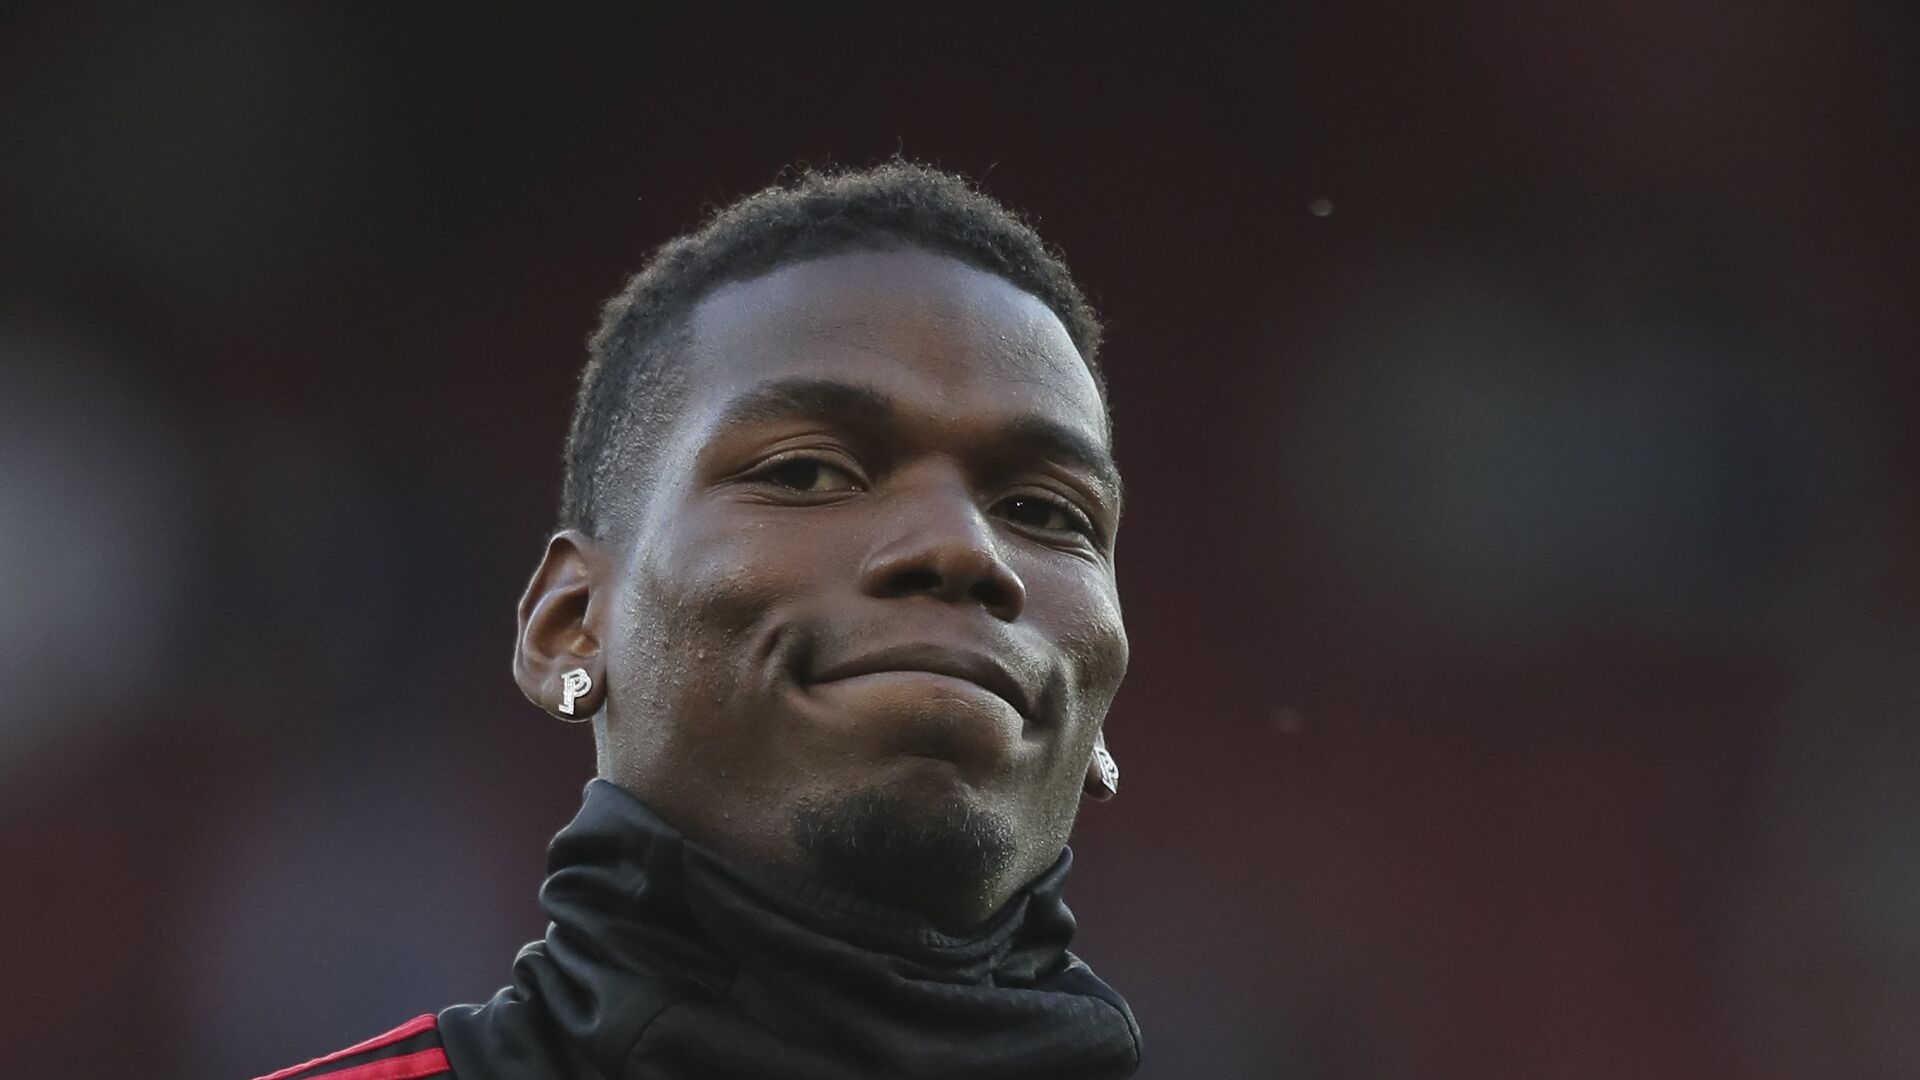 Manchester United's Paul Pogba applauds the fans as he takes part in the warm up prior to the start of the English Premier League soccer match between Manchester United and Leicester City at Old Trafford, in Manchester, England, Friday, Aug. 10, 2018 - اسپوتنیک افغانستان  , 1920, 10.07.2022